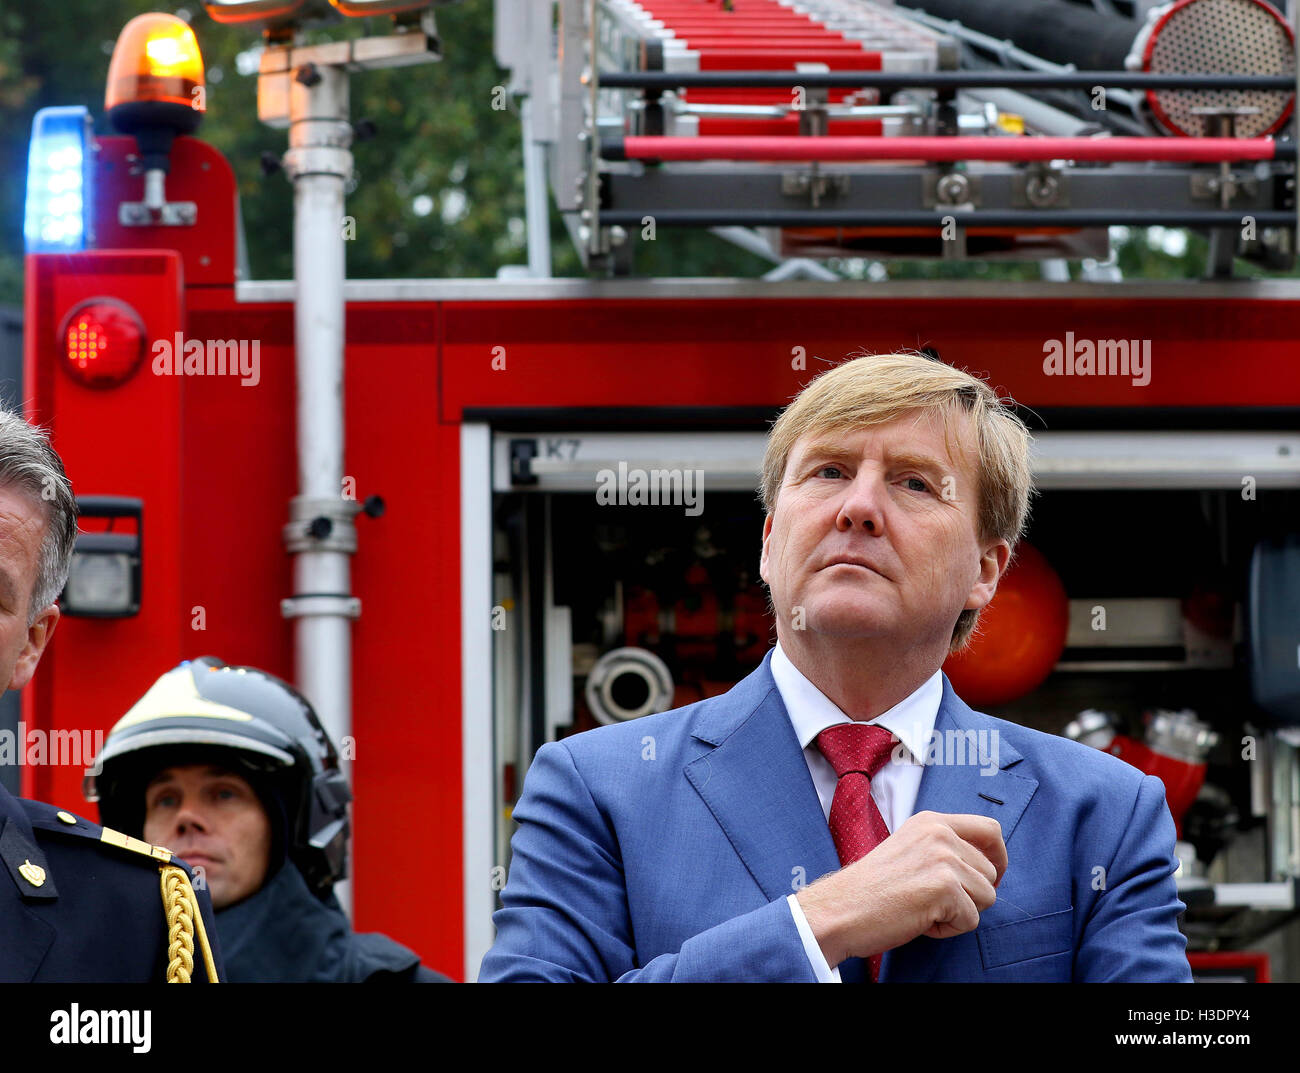 Deurningen, The Netherlands. 6th Oct, 2016. King Willem-Alexander of The Netherlands (R) visits the Twente Safety Campus in Deurningen, The Netherlands, 6 October 2016. At the campus school children and the elderly how to react in dangerous situations. Photo: RPE/Albert Nieboer/ /POINT DE VUE OUT/dpa/Alamy Live News Stock Photo